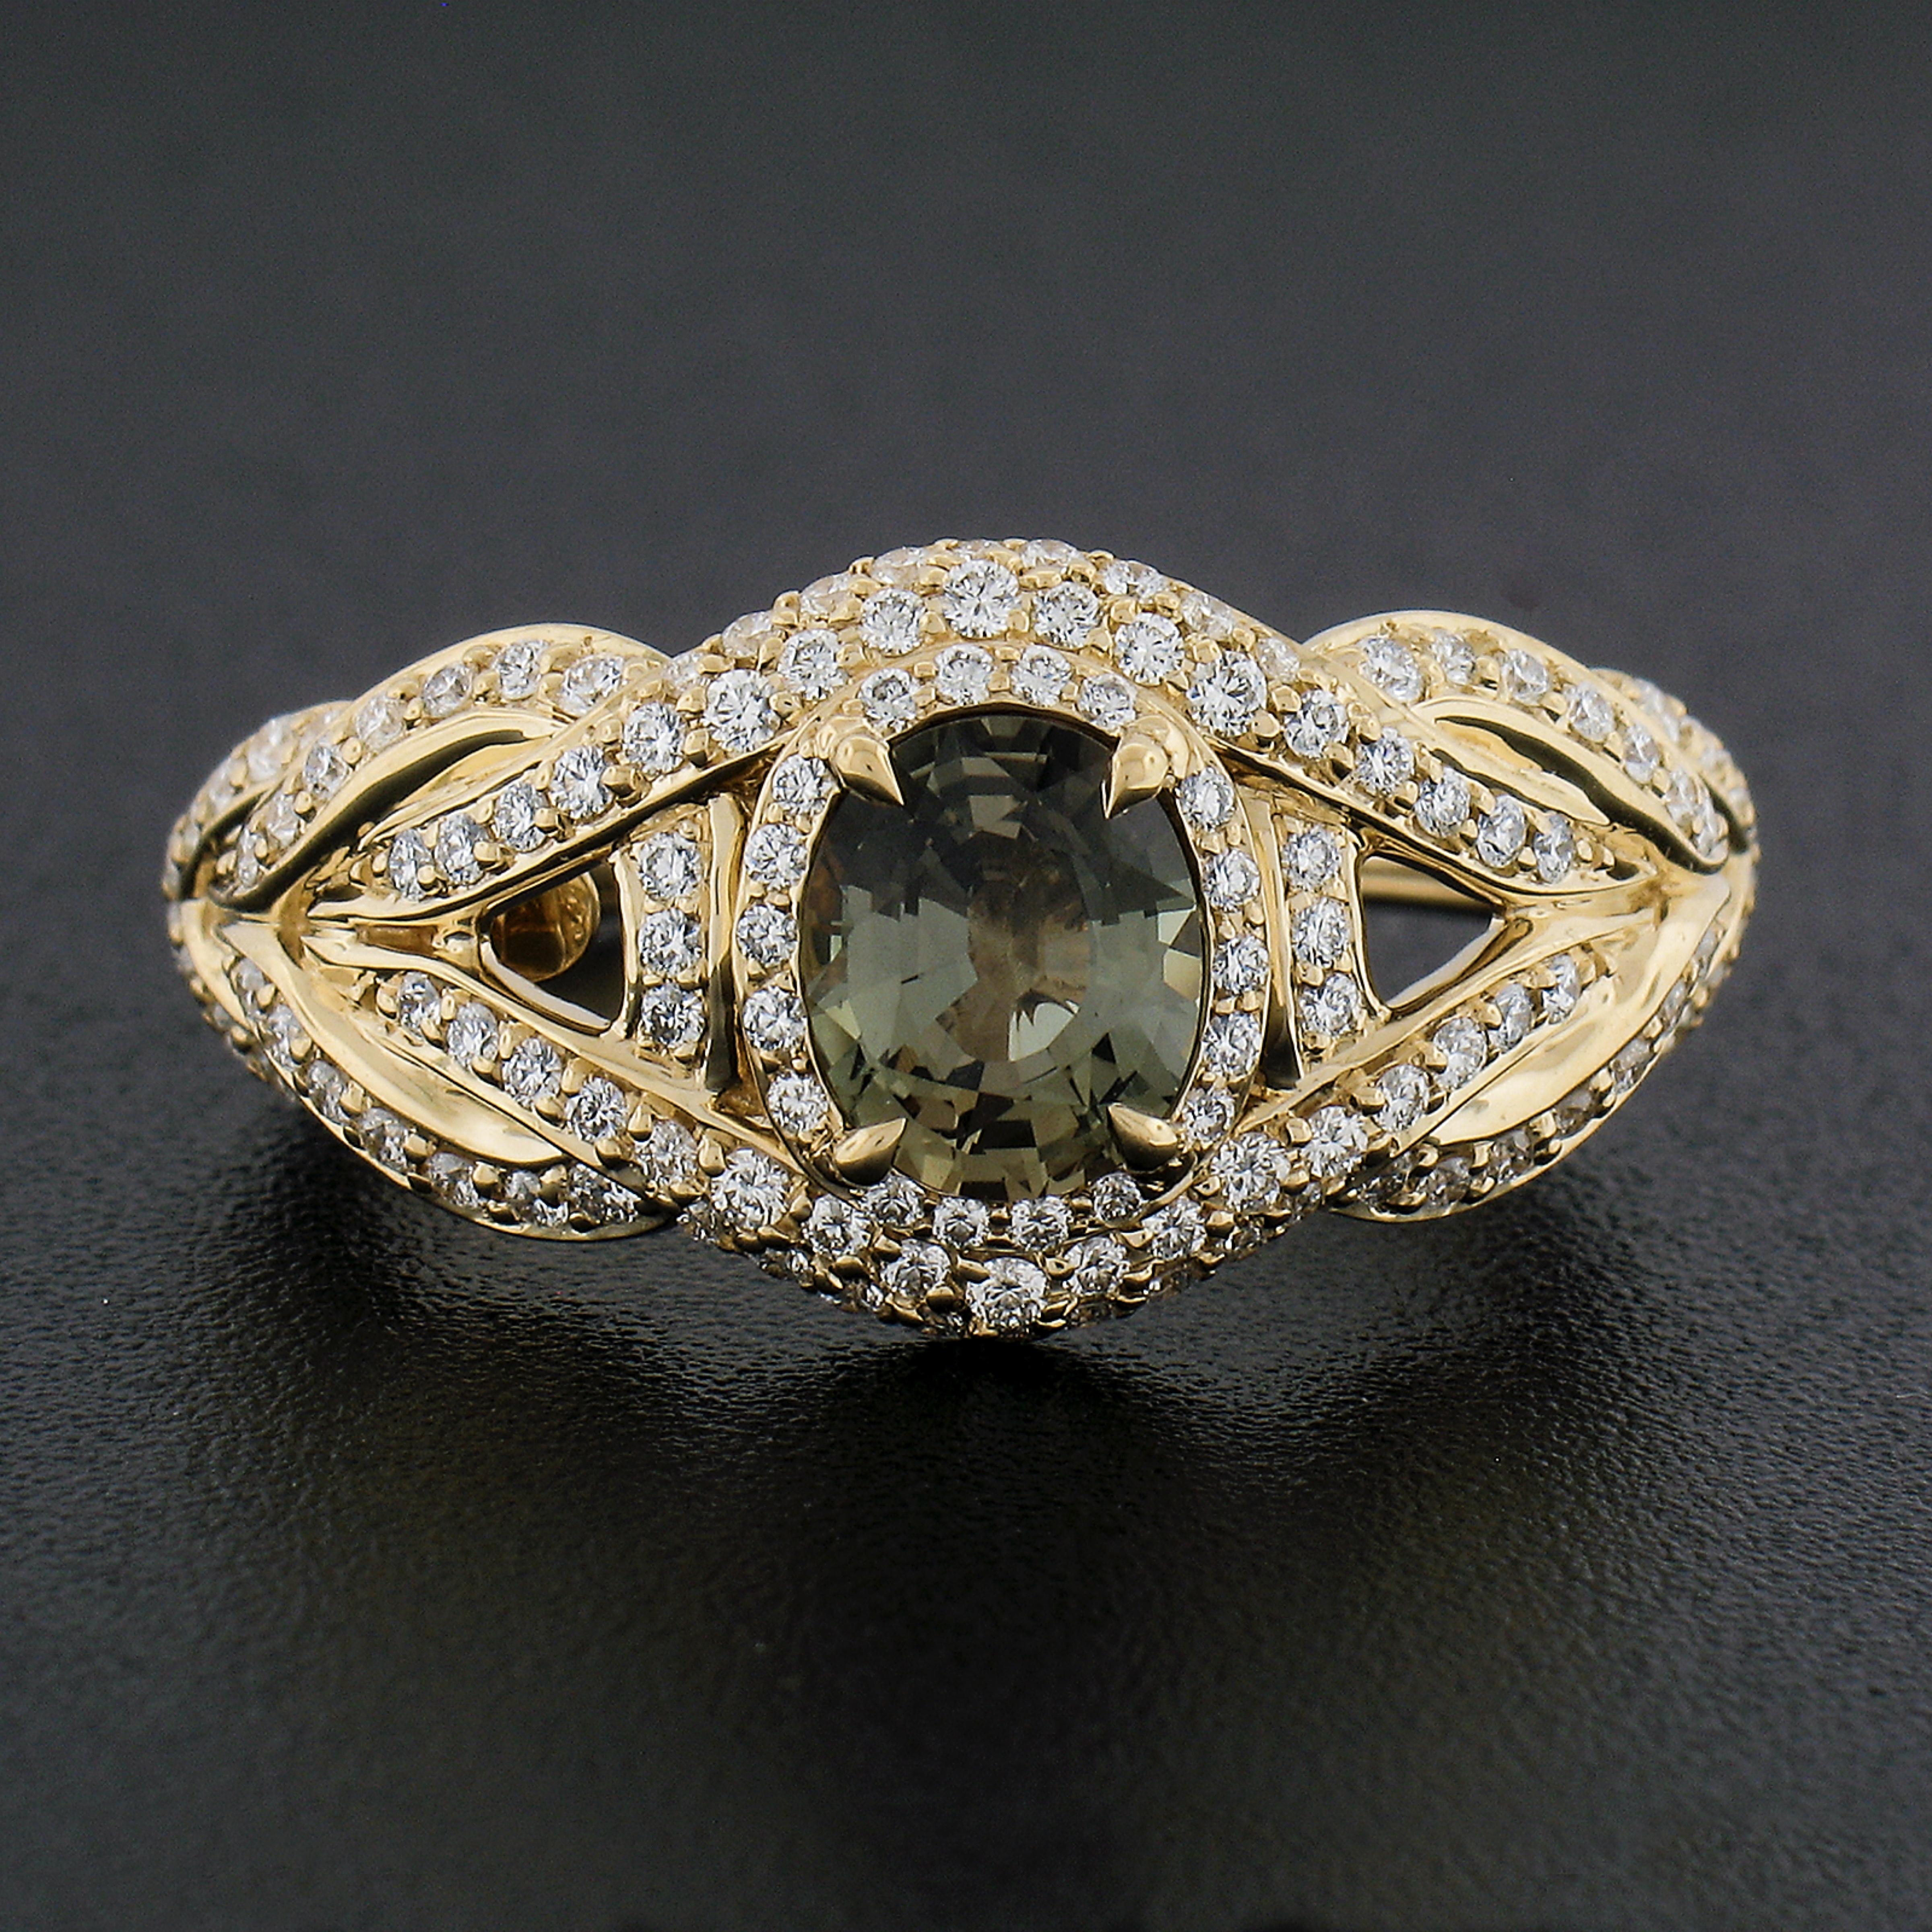 Kat Florence 18k Gold 1.74ct AIGS Graded Alexandrite & Diamond Statement Ring In Excellent Condition For Sale In Montclair, NJ